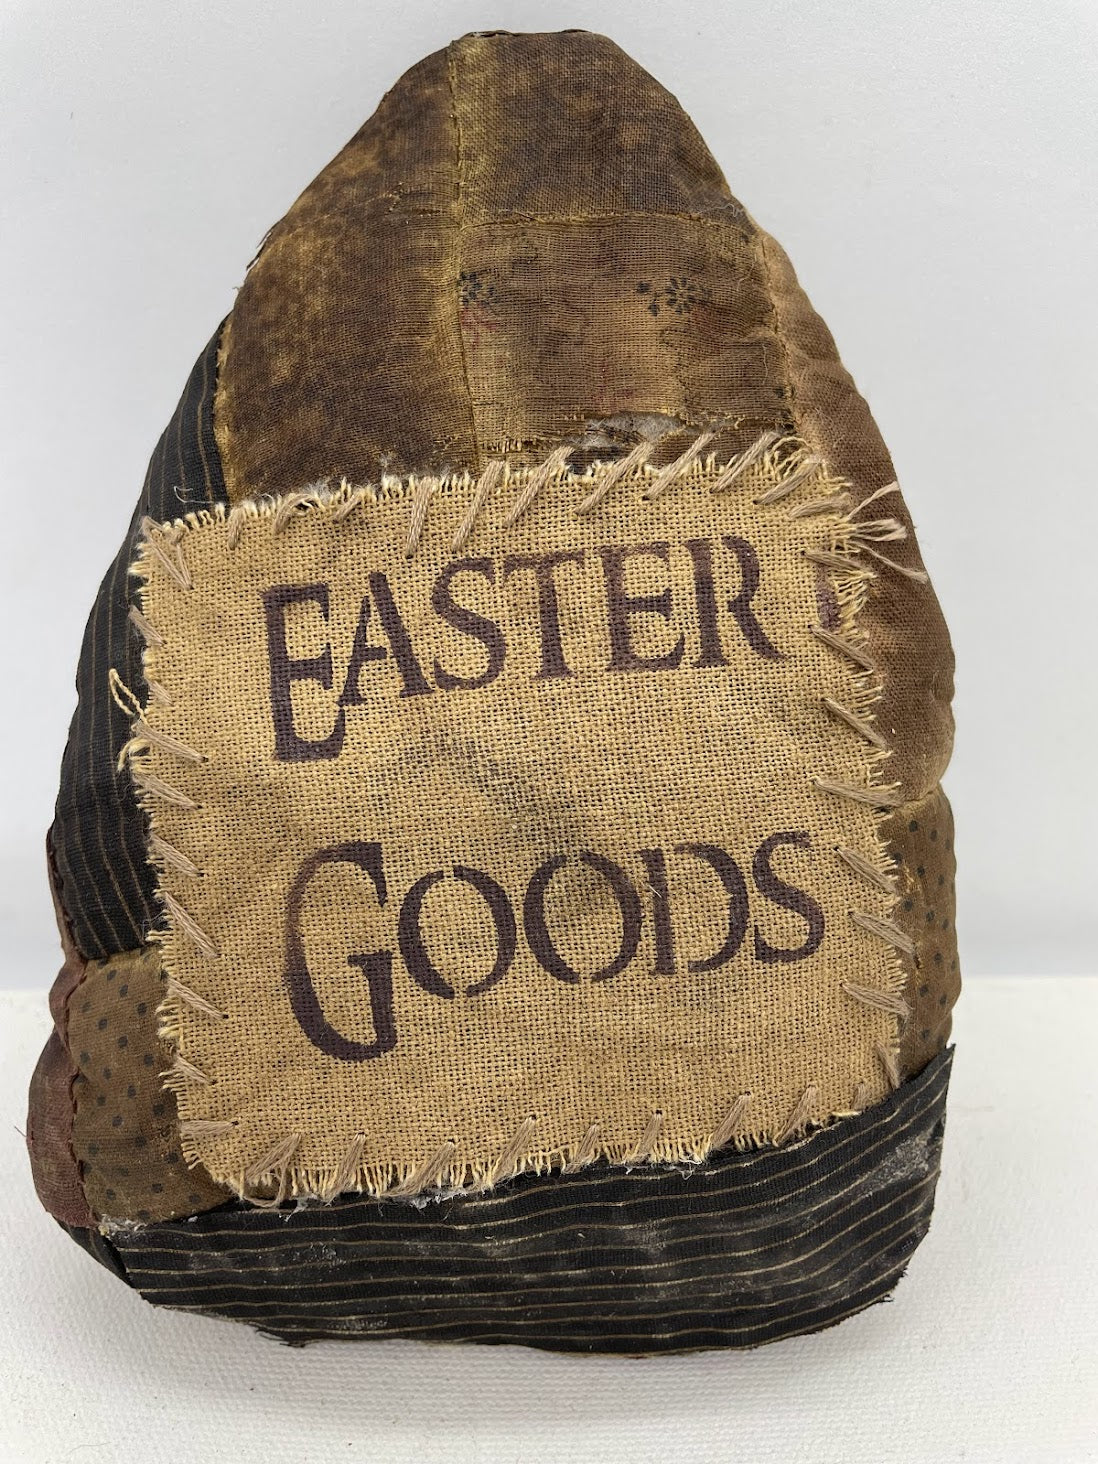 Extreme Primitive Vintage Quilted Easter Goods Egg Bowl Fillers Stained Grubby 7&quot; x 5&quot;